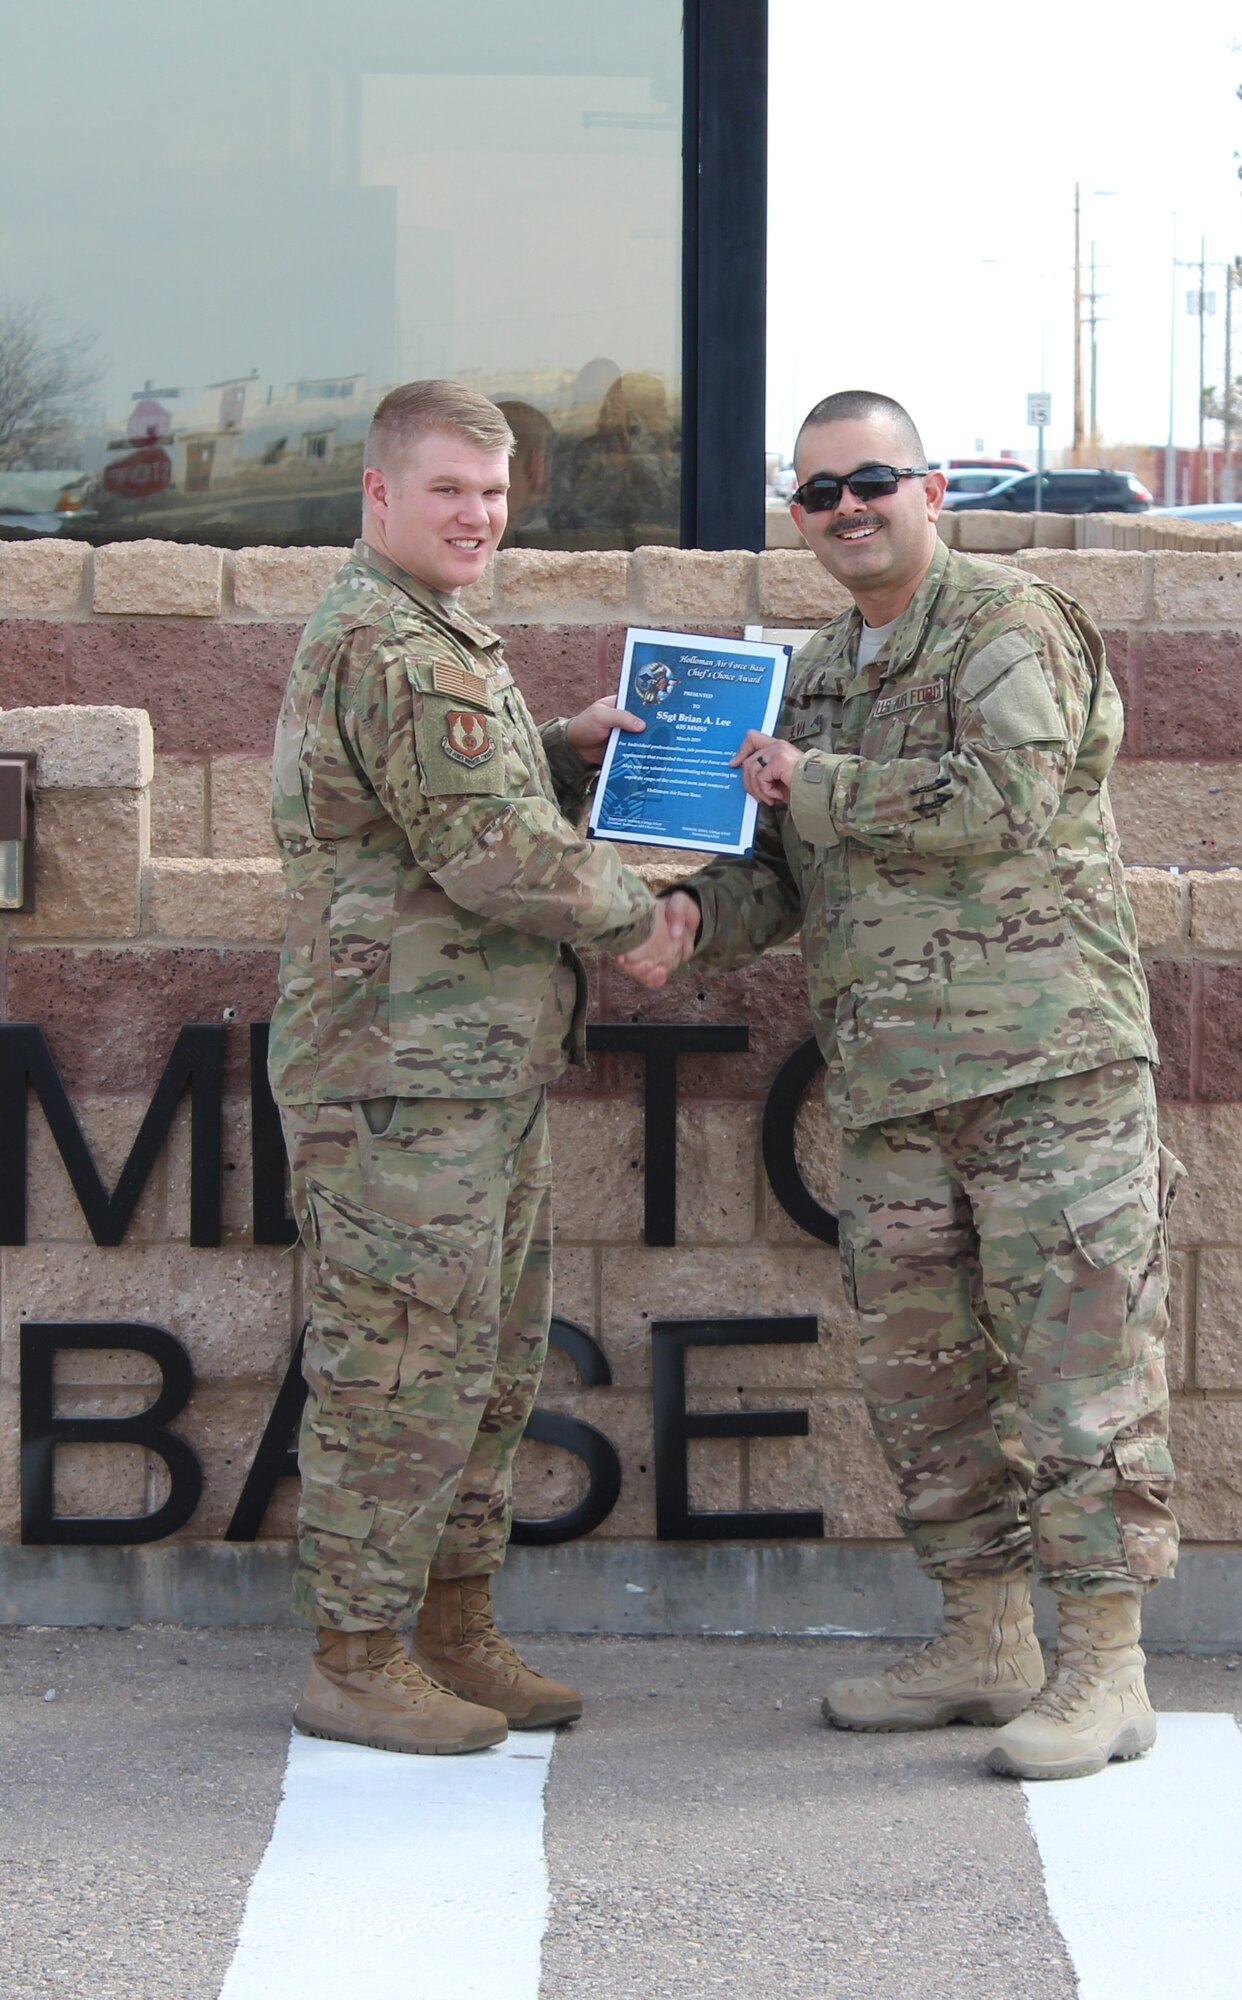 (From right to left) Chief Master Sgt. Manuel Silva, 635th Materiel Maintenance Support Squadron superintendent, presents the Chief’s Choice Award to Staff Sgt. Brian Lee, 635th MMSS noncommissioned officer in charge of service support, March 27, 2019, on Holloman Air Force Base, N.M. Holloman’s Chiefs Group has a monthly recognition program titled Chief’s Choice Award. Every month a chief has the honor of choosing a deserving Airman for an outstanding act or for continuous outstanding performance. (Courtesy photo)